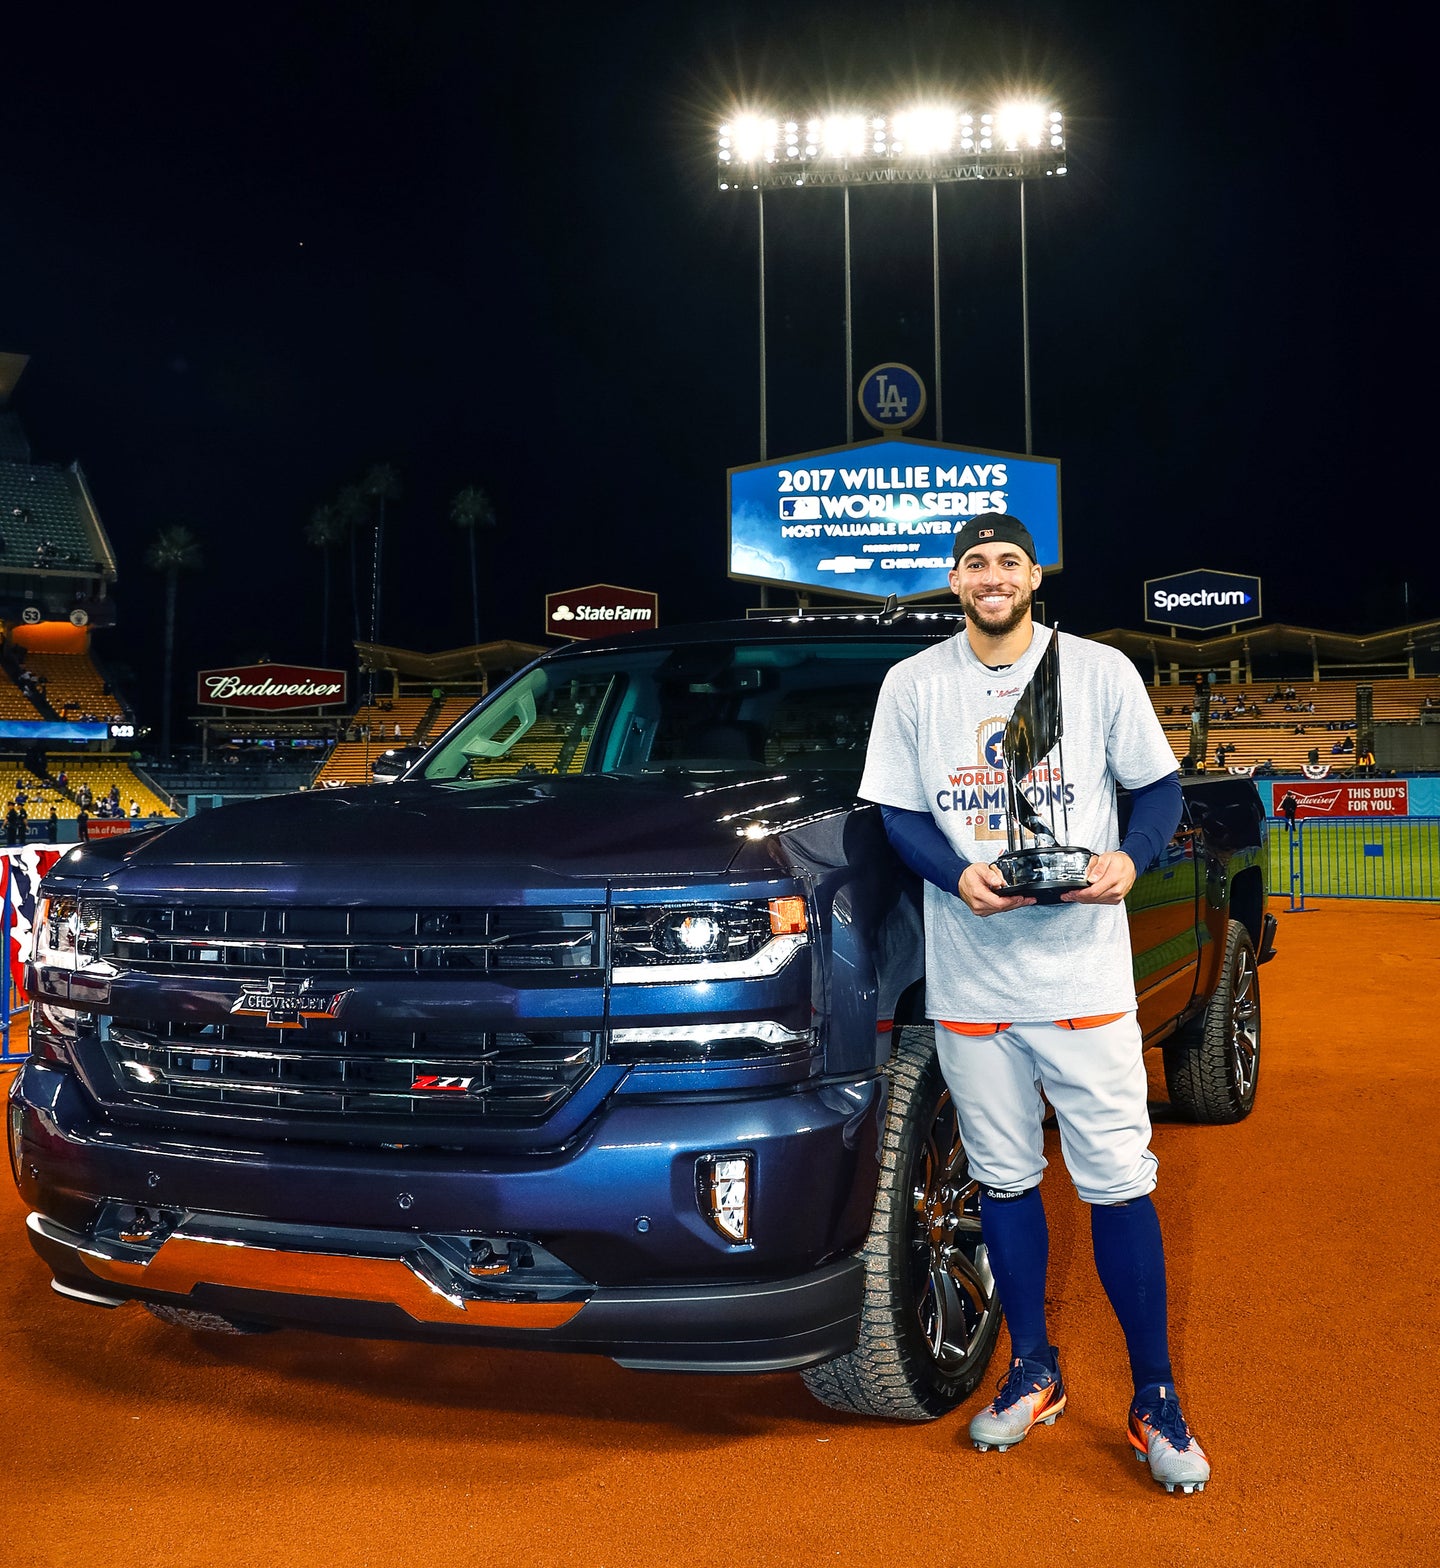 World Series MVP With 5 Home Runs and a Big Truck